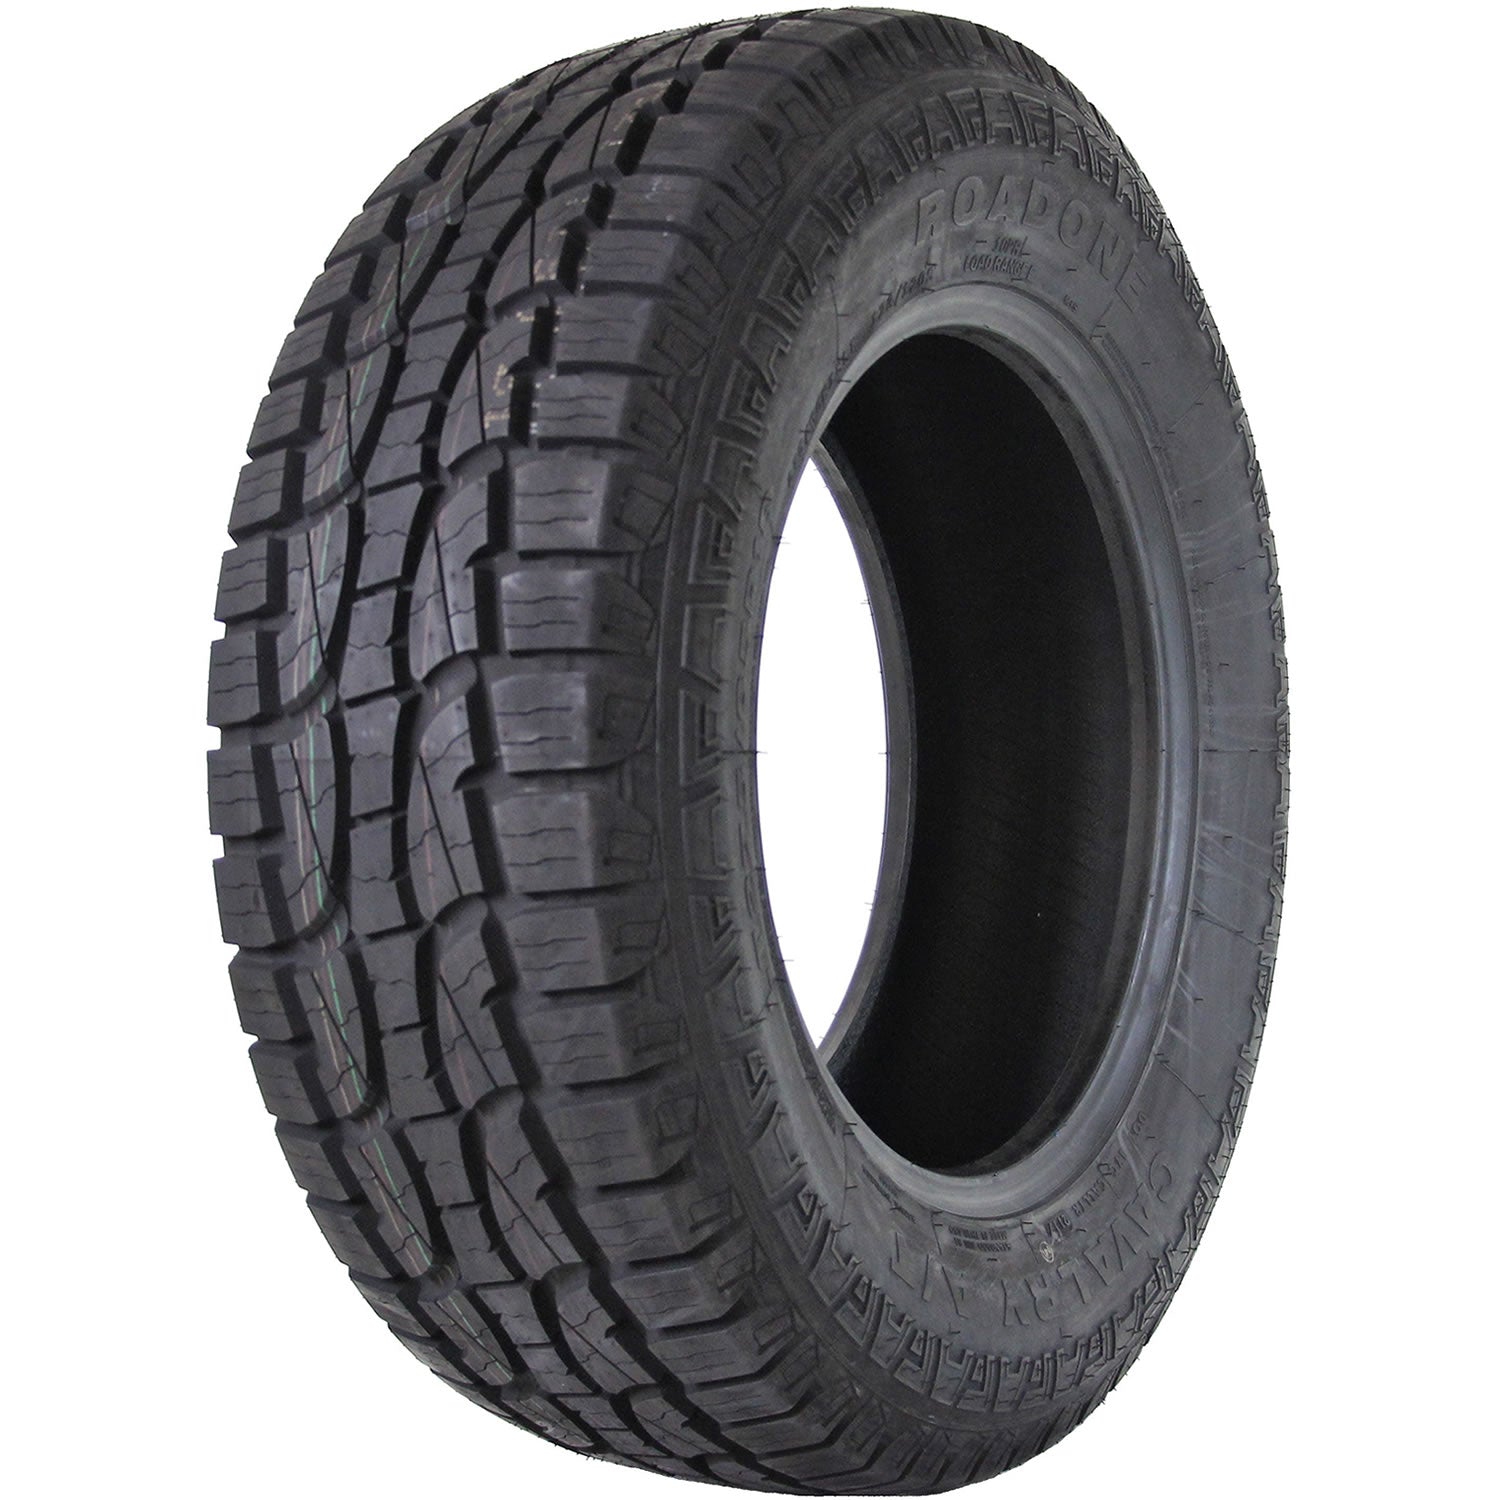 ROAD ONE CAVALRY A/T LT275/65R20 (34.1X11R 20) Tires